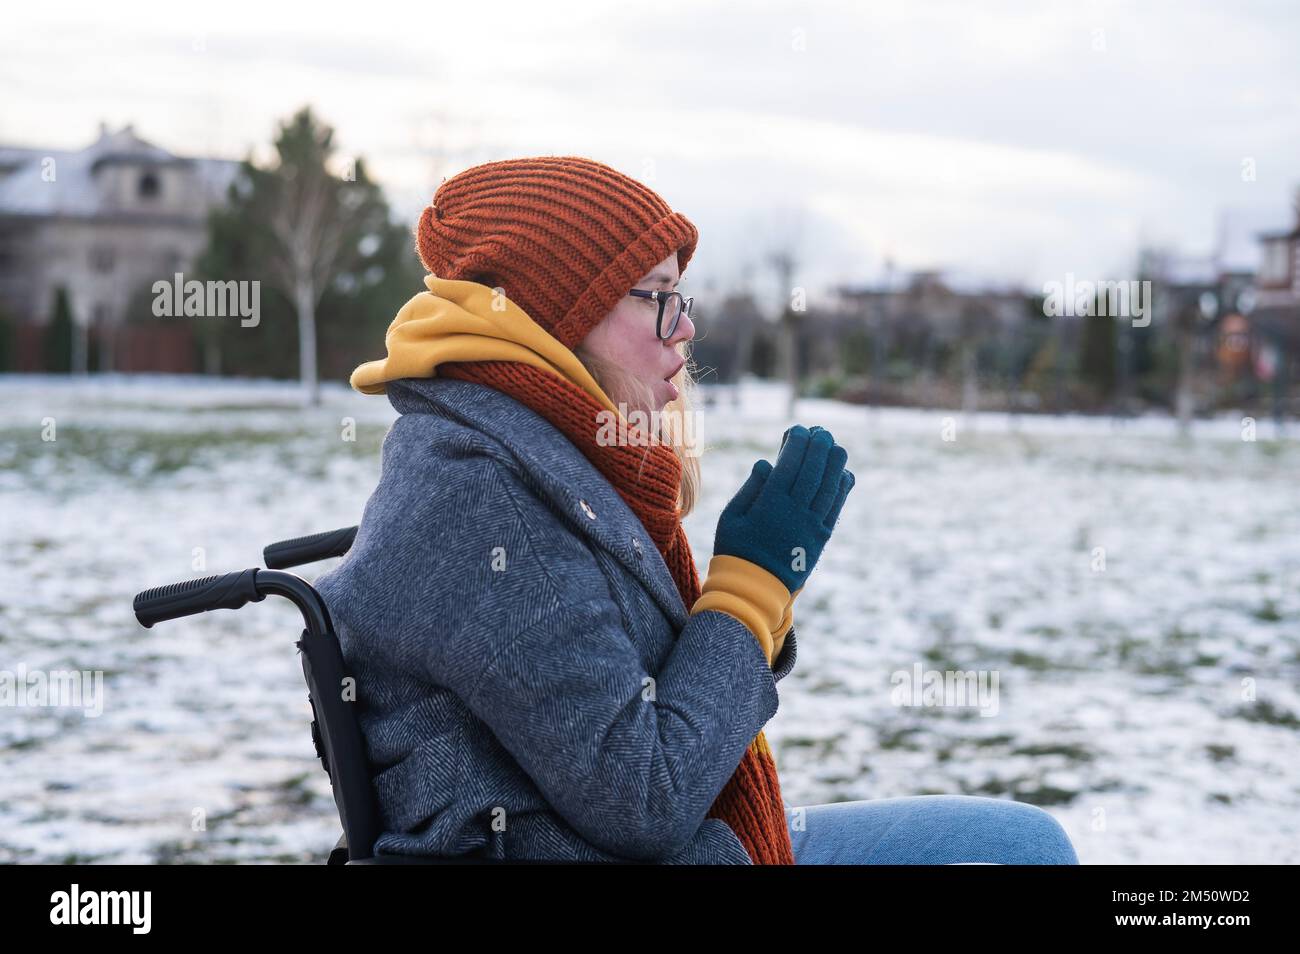 Caucasian woman freezes in a wheelchair in winter. Stock Photo